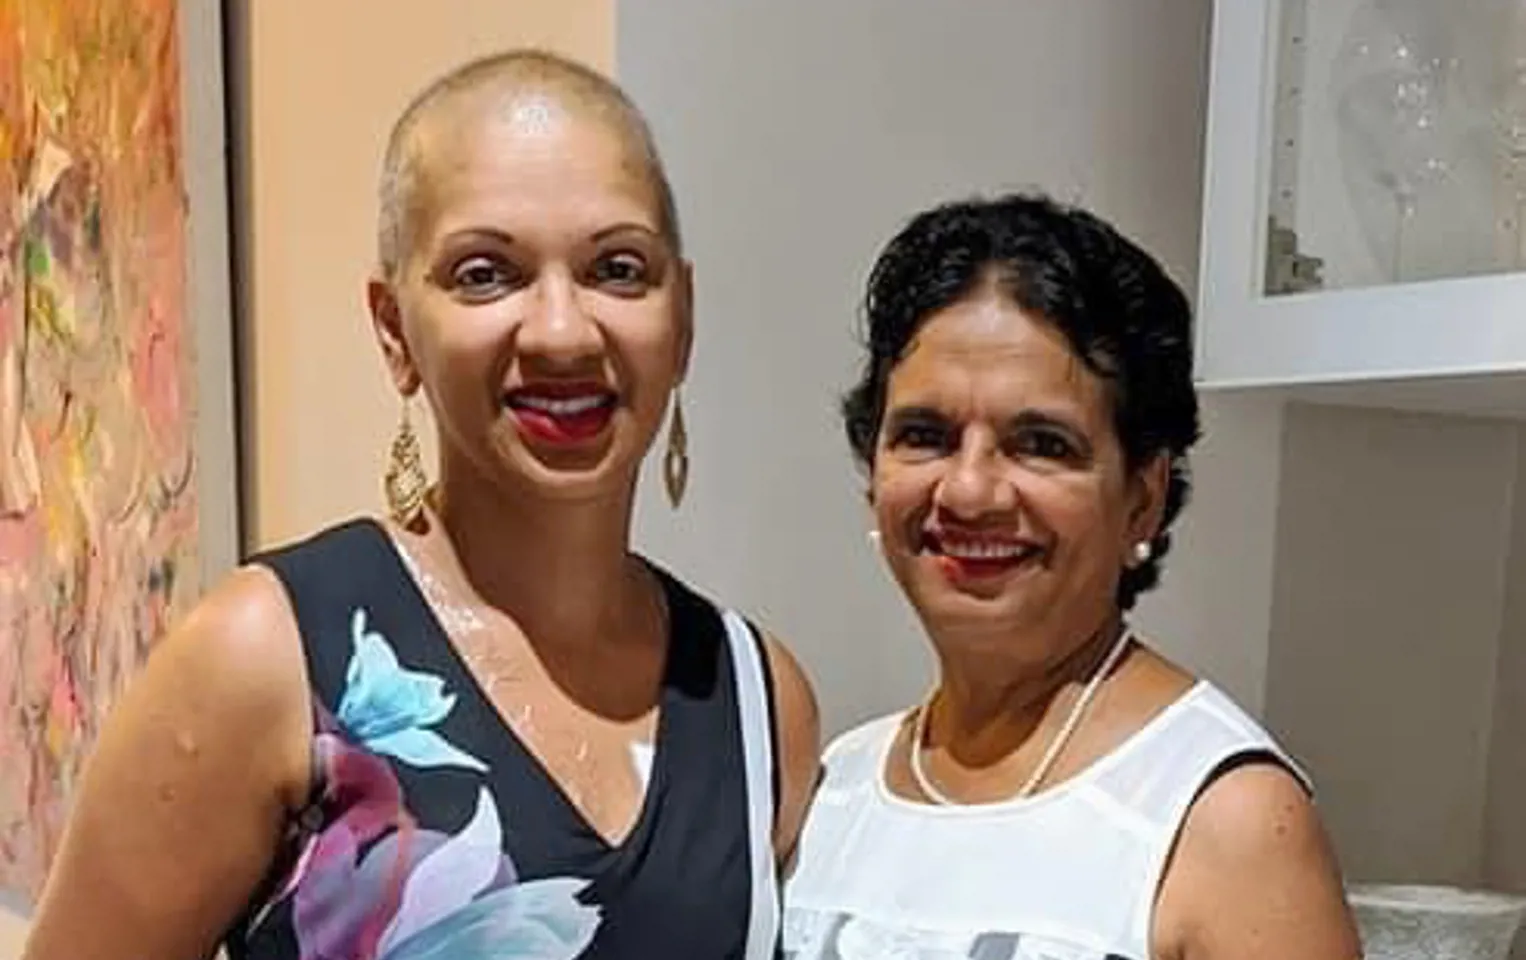 Dipthi with no hair in a floral dress standing next to her mother, they're both smiling at the camera